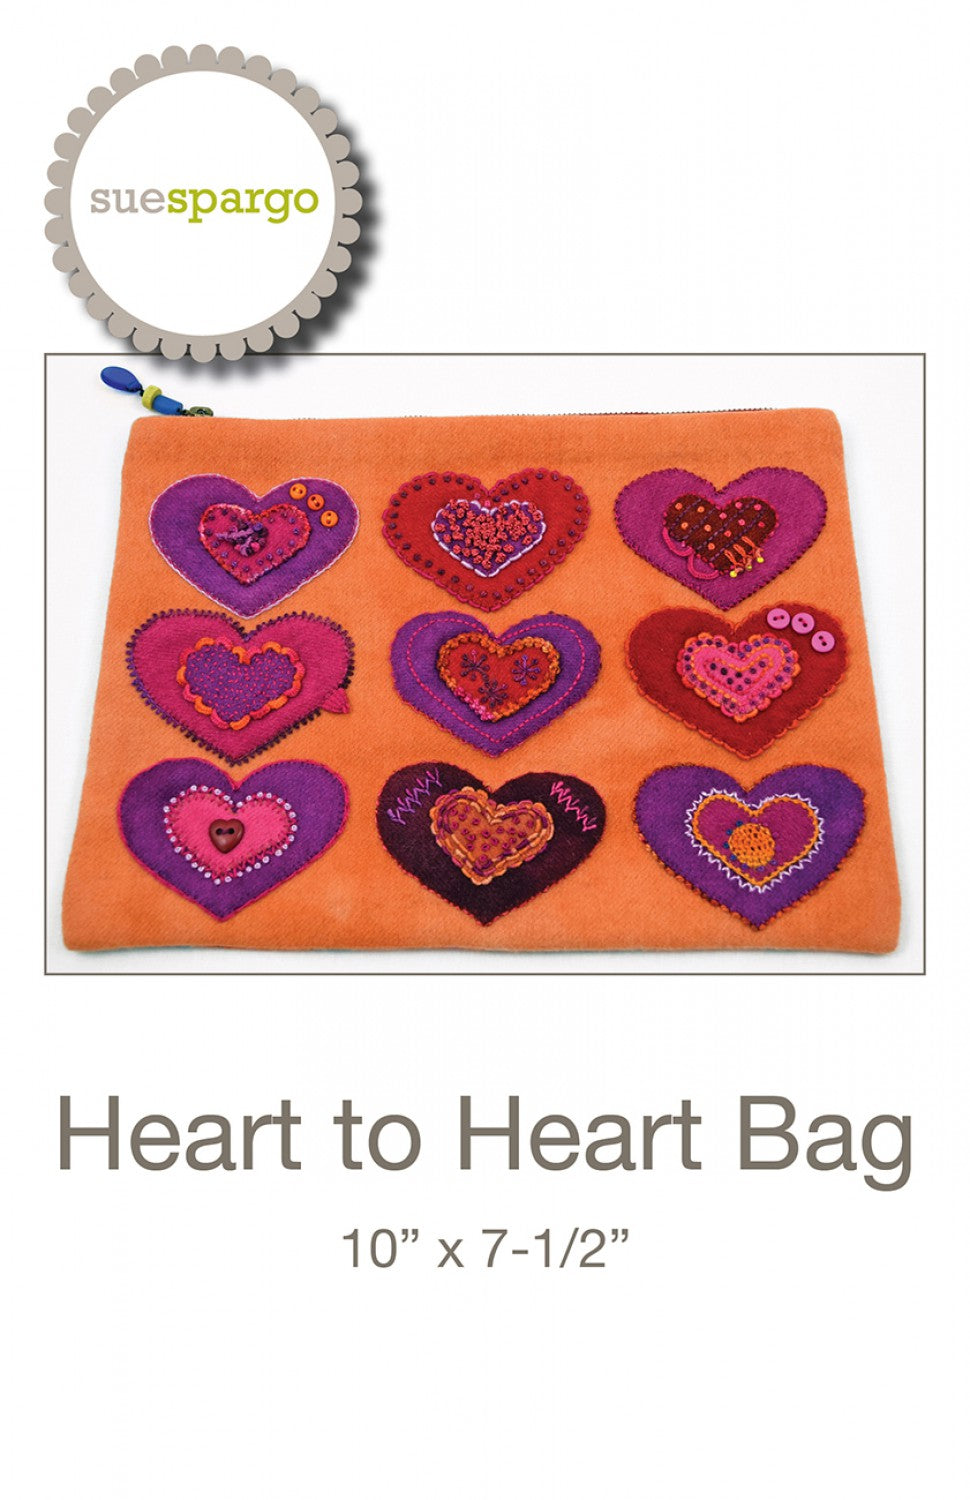 Heart to Heart Bag - Applique, Embroidery, and Sewing Pattern by Sue Spargo of Folk Art Quilts